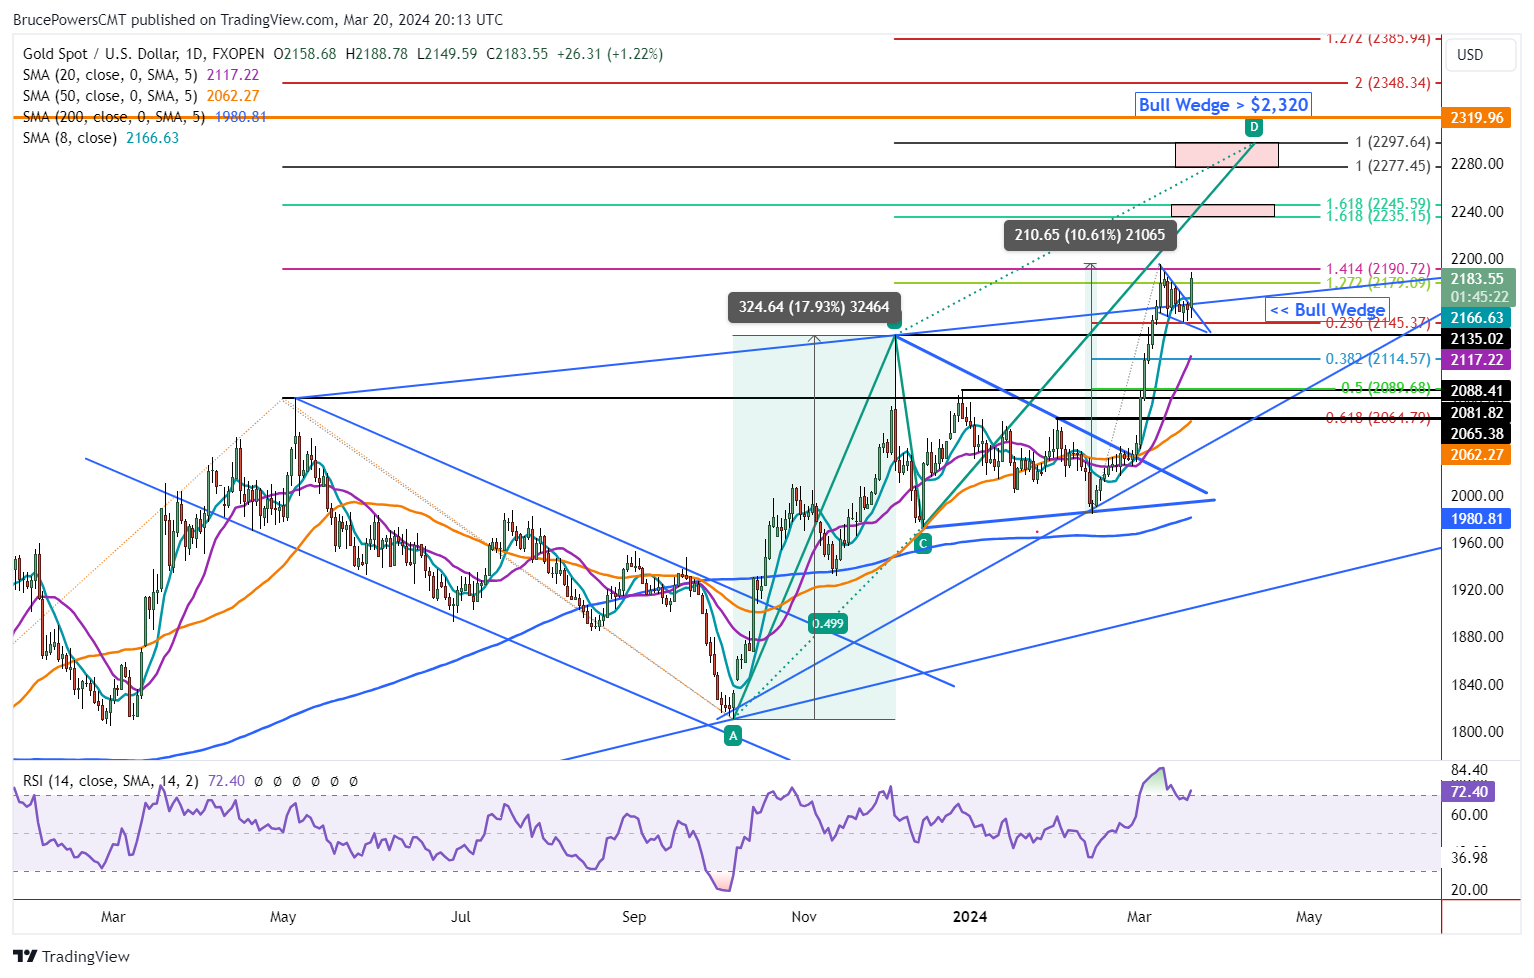 Gold Price Forecast: Wedge Breakout Points to Higher Prices | Nasdaq